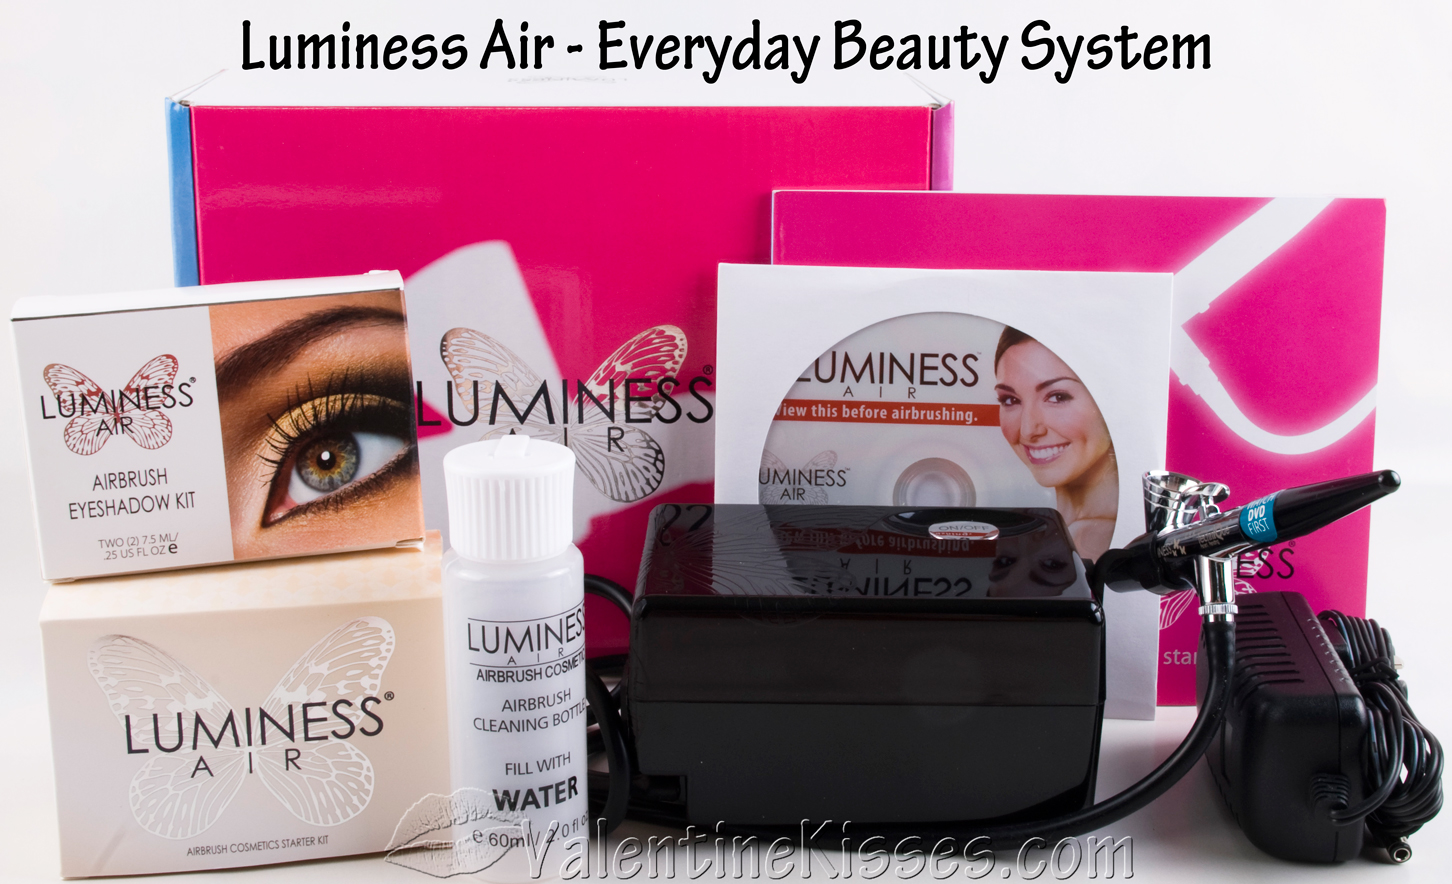 Luminess Airbrush Spray Foundation Makeup- Does This Thing Really Work? 